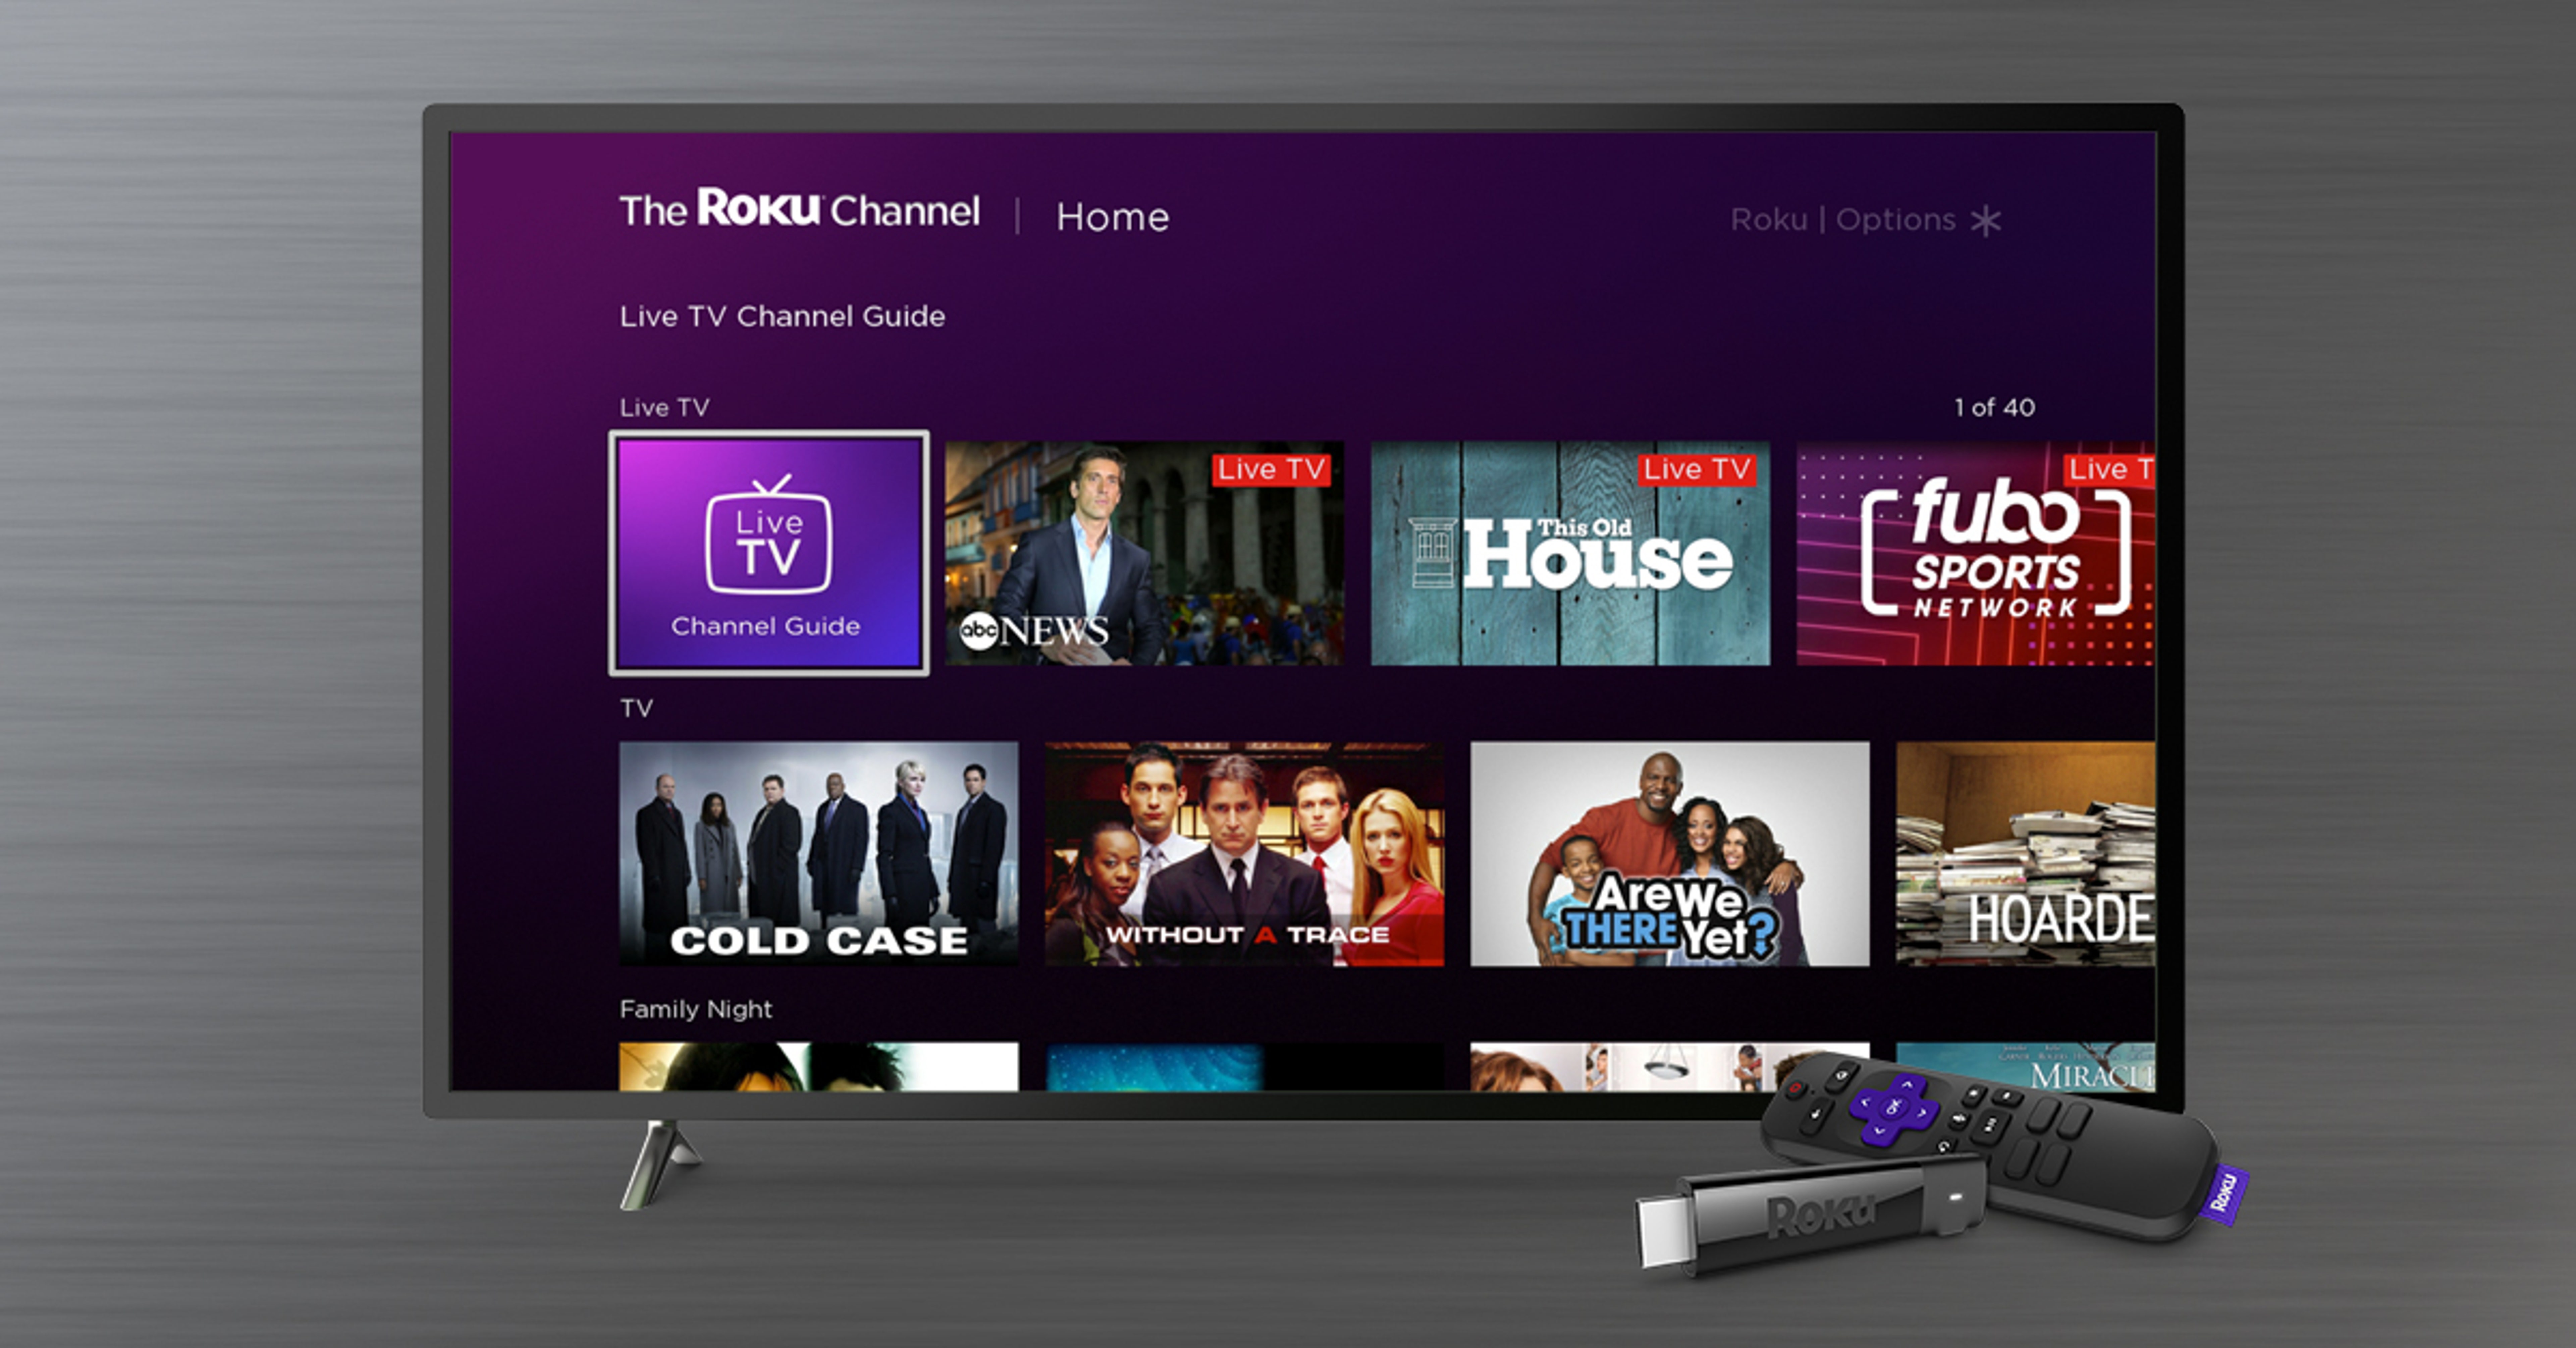 Roku Stock Dips Ahead Of Earnings Report: What To Watch For